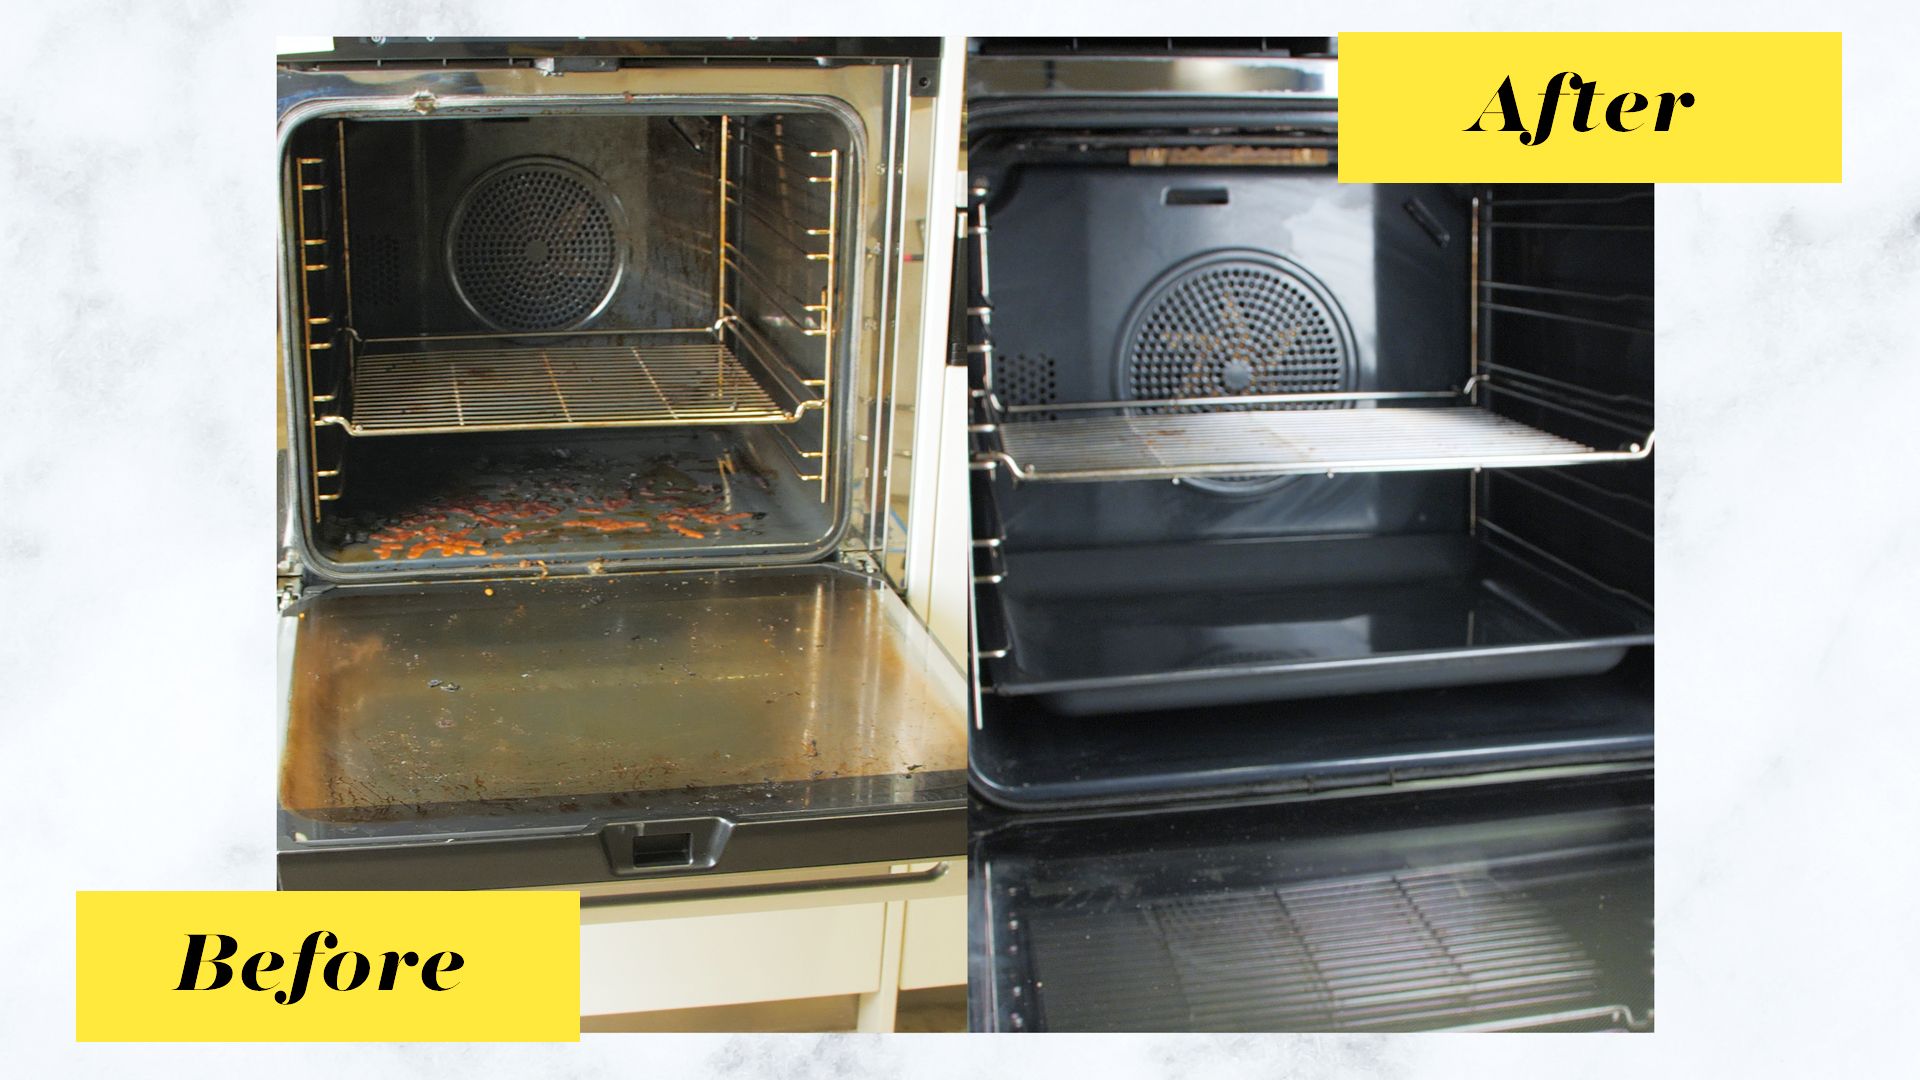 How to Clean an Oven in 3 Different Ways - Now from Nationwide